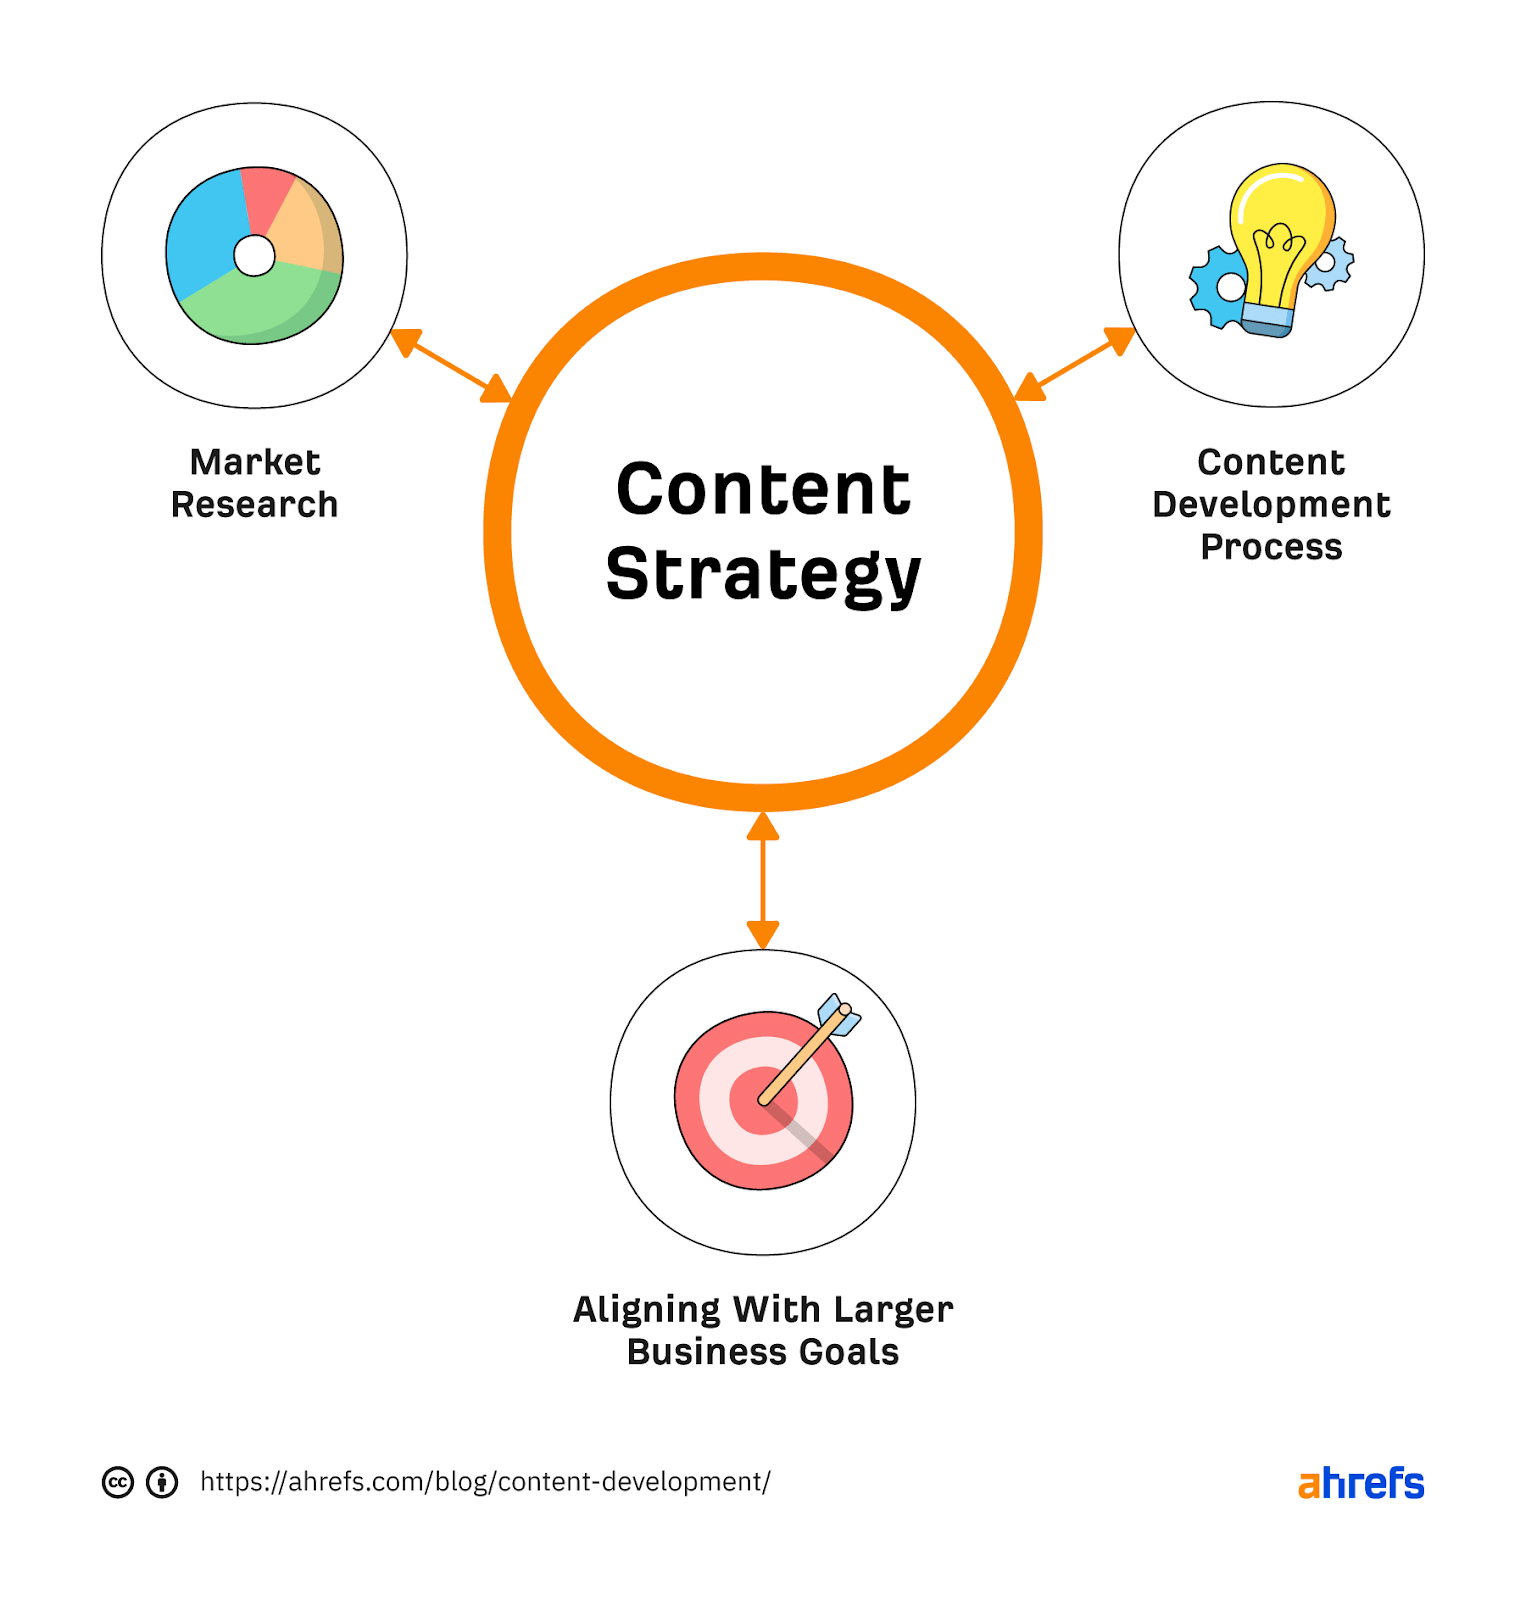 Flowchart showing "Content Development Process" is one of three key aspects of "Content Strategy"